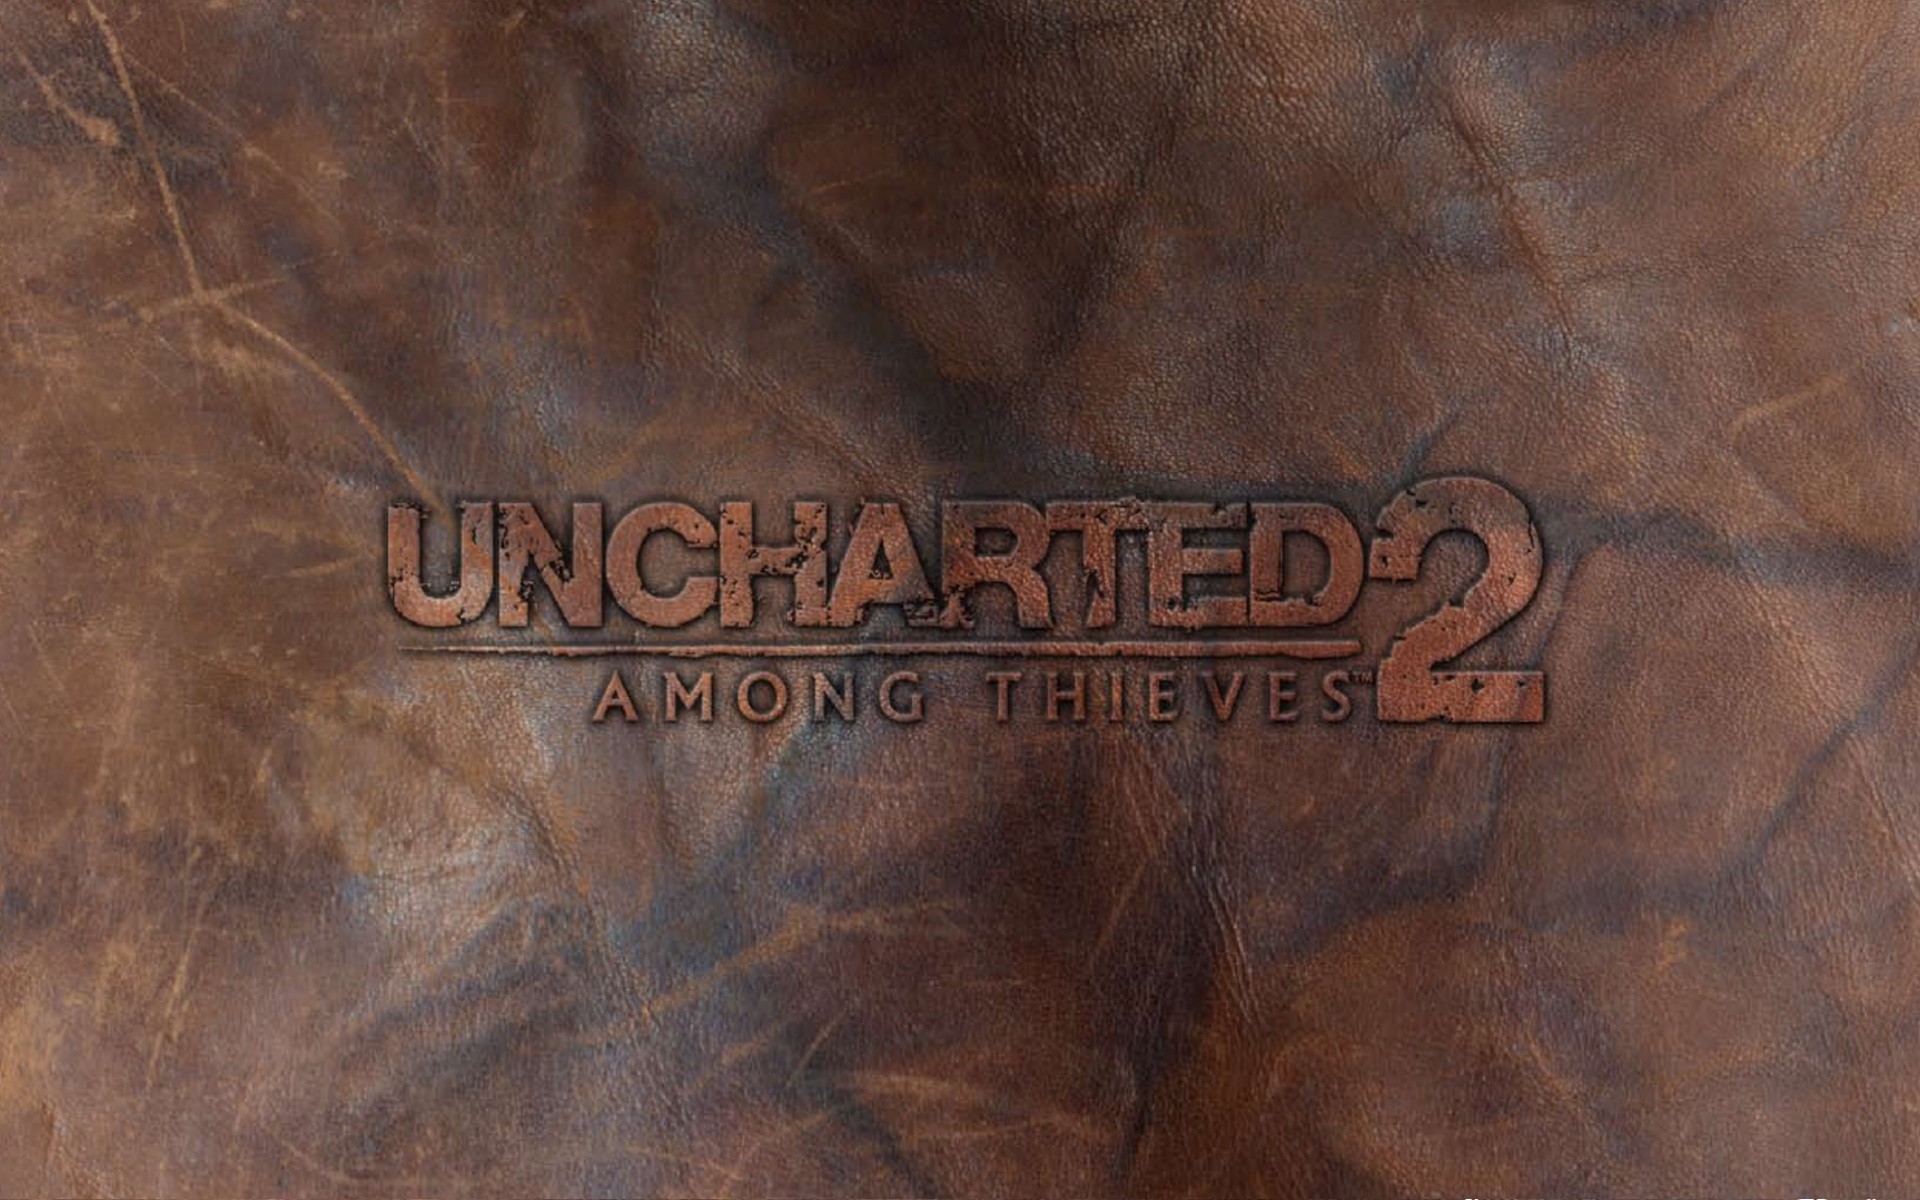 Uncharted 2 among thieves steam фото 119